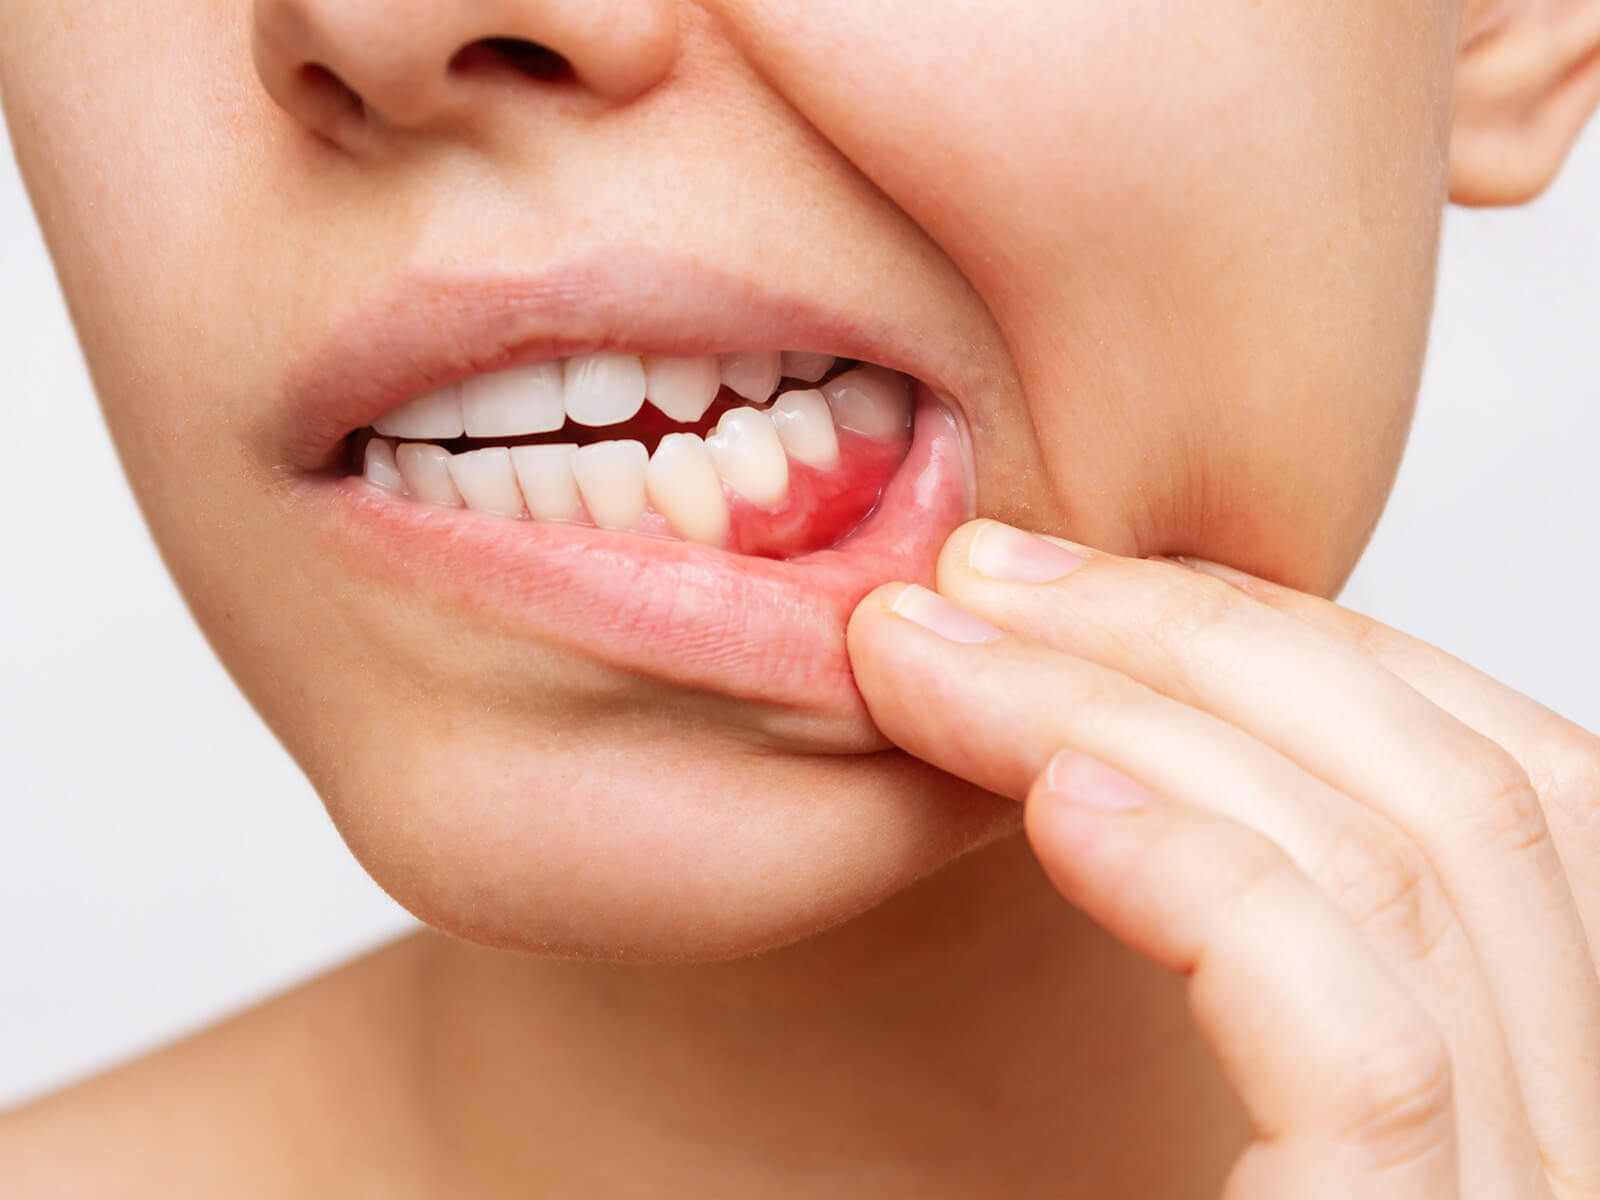 Why Do You Have A Bump on Your Gums?